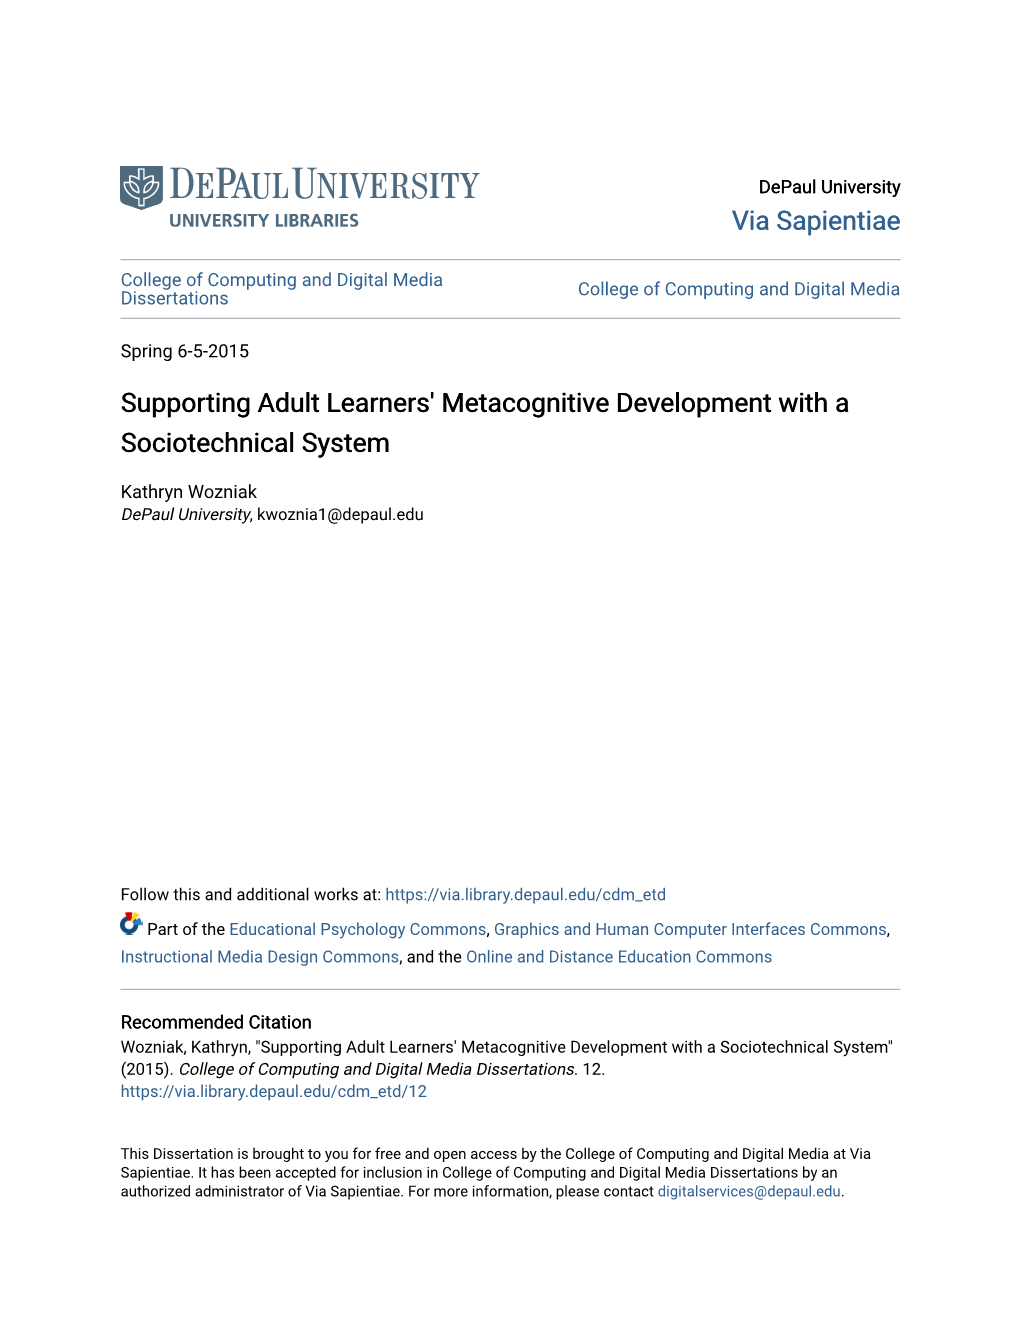 Supporting Adult Learners' Metacognitive Development with a Sociotechnical System